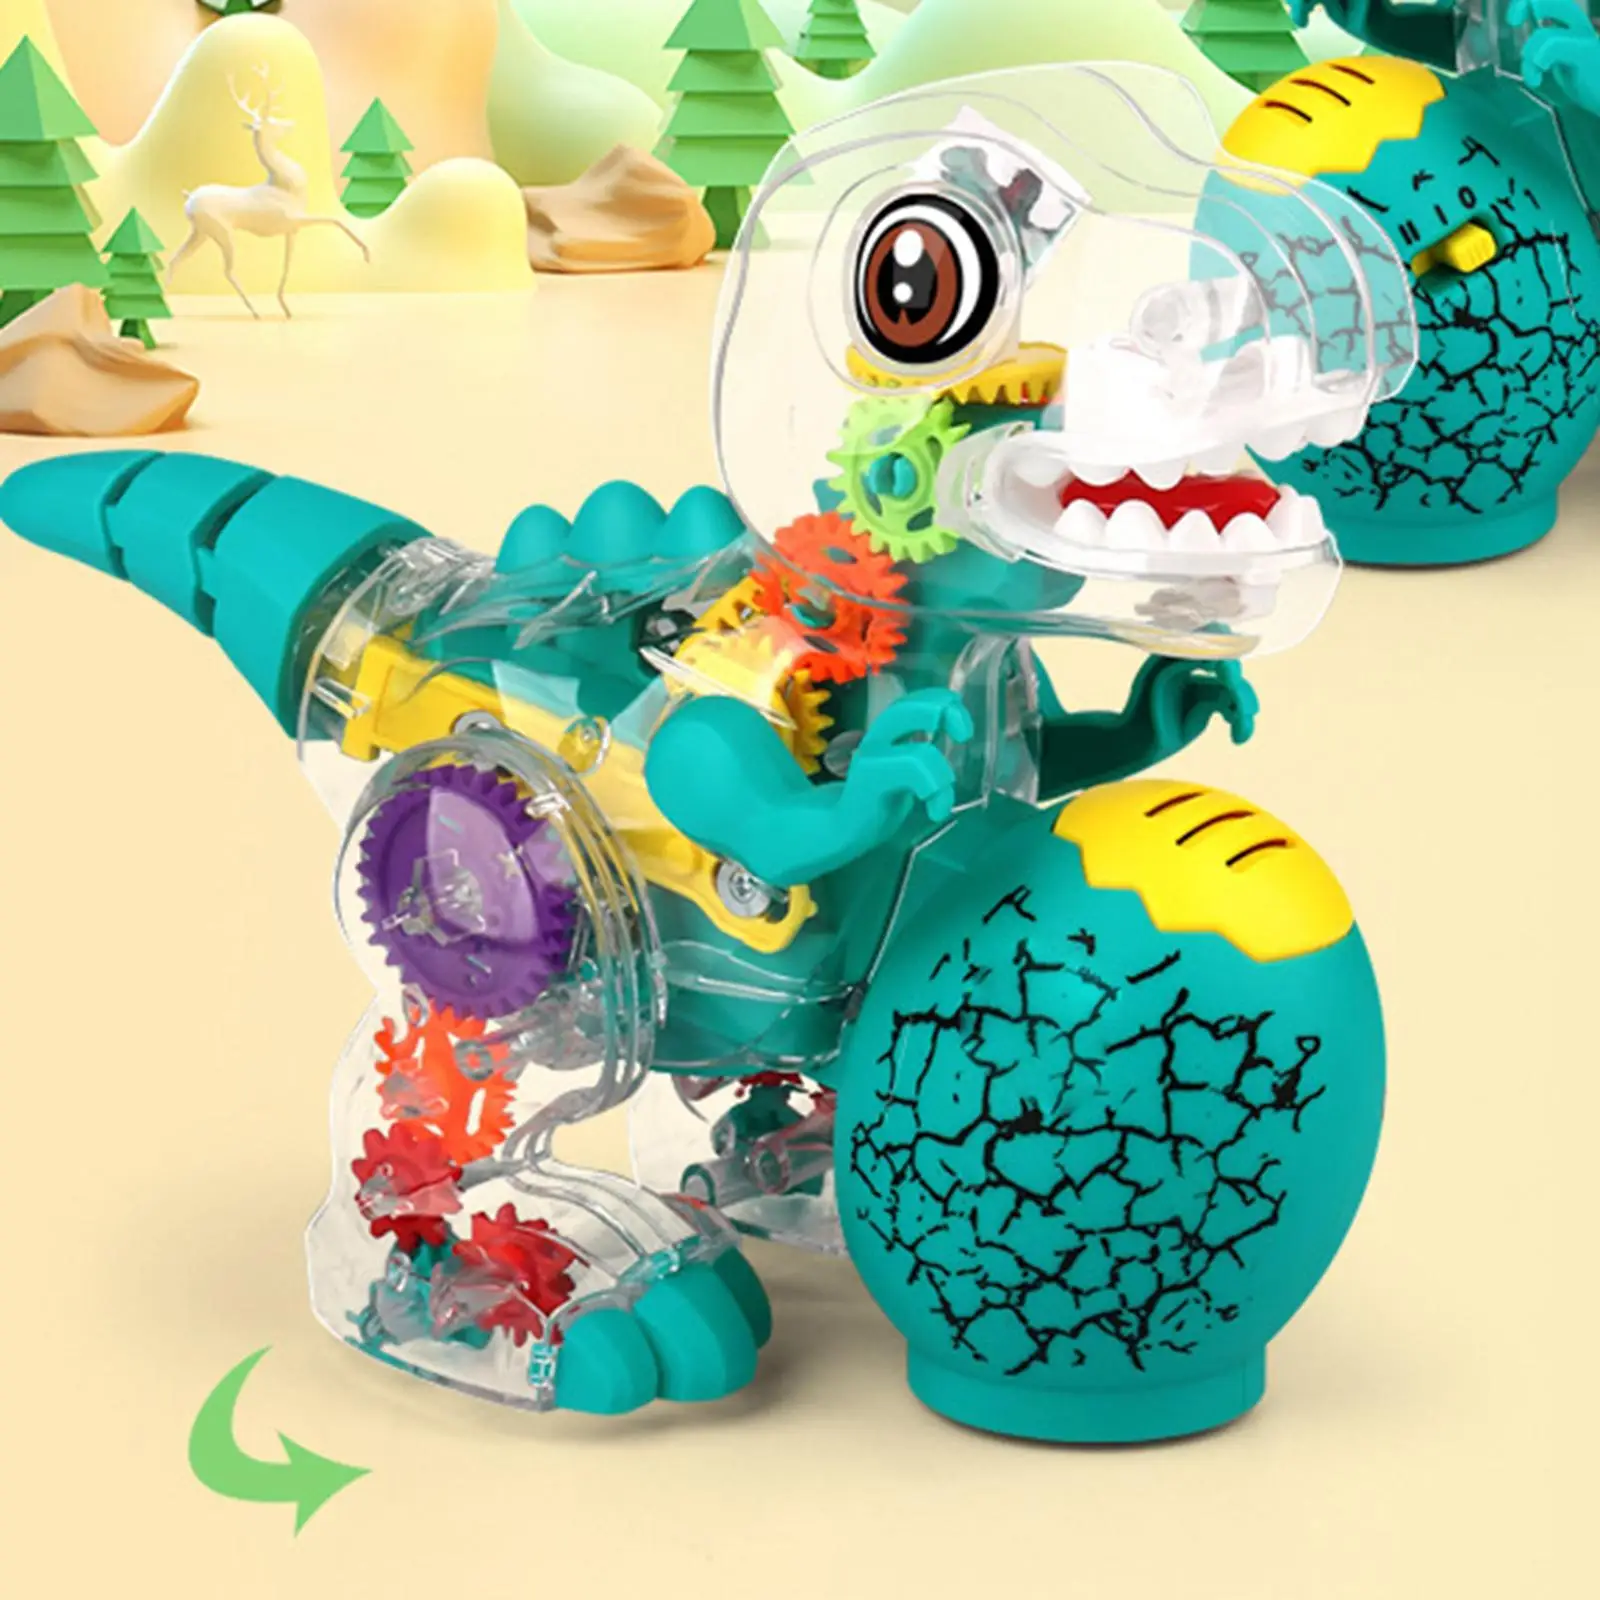 Electric Dinosaur Toy Mechanical Toddlers Building Colored Moving Gears Halloween Musical Toy for Girls Boys Preschool Toy Kids